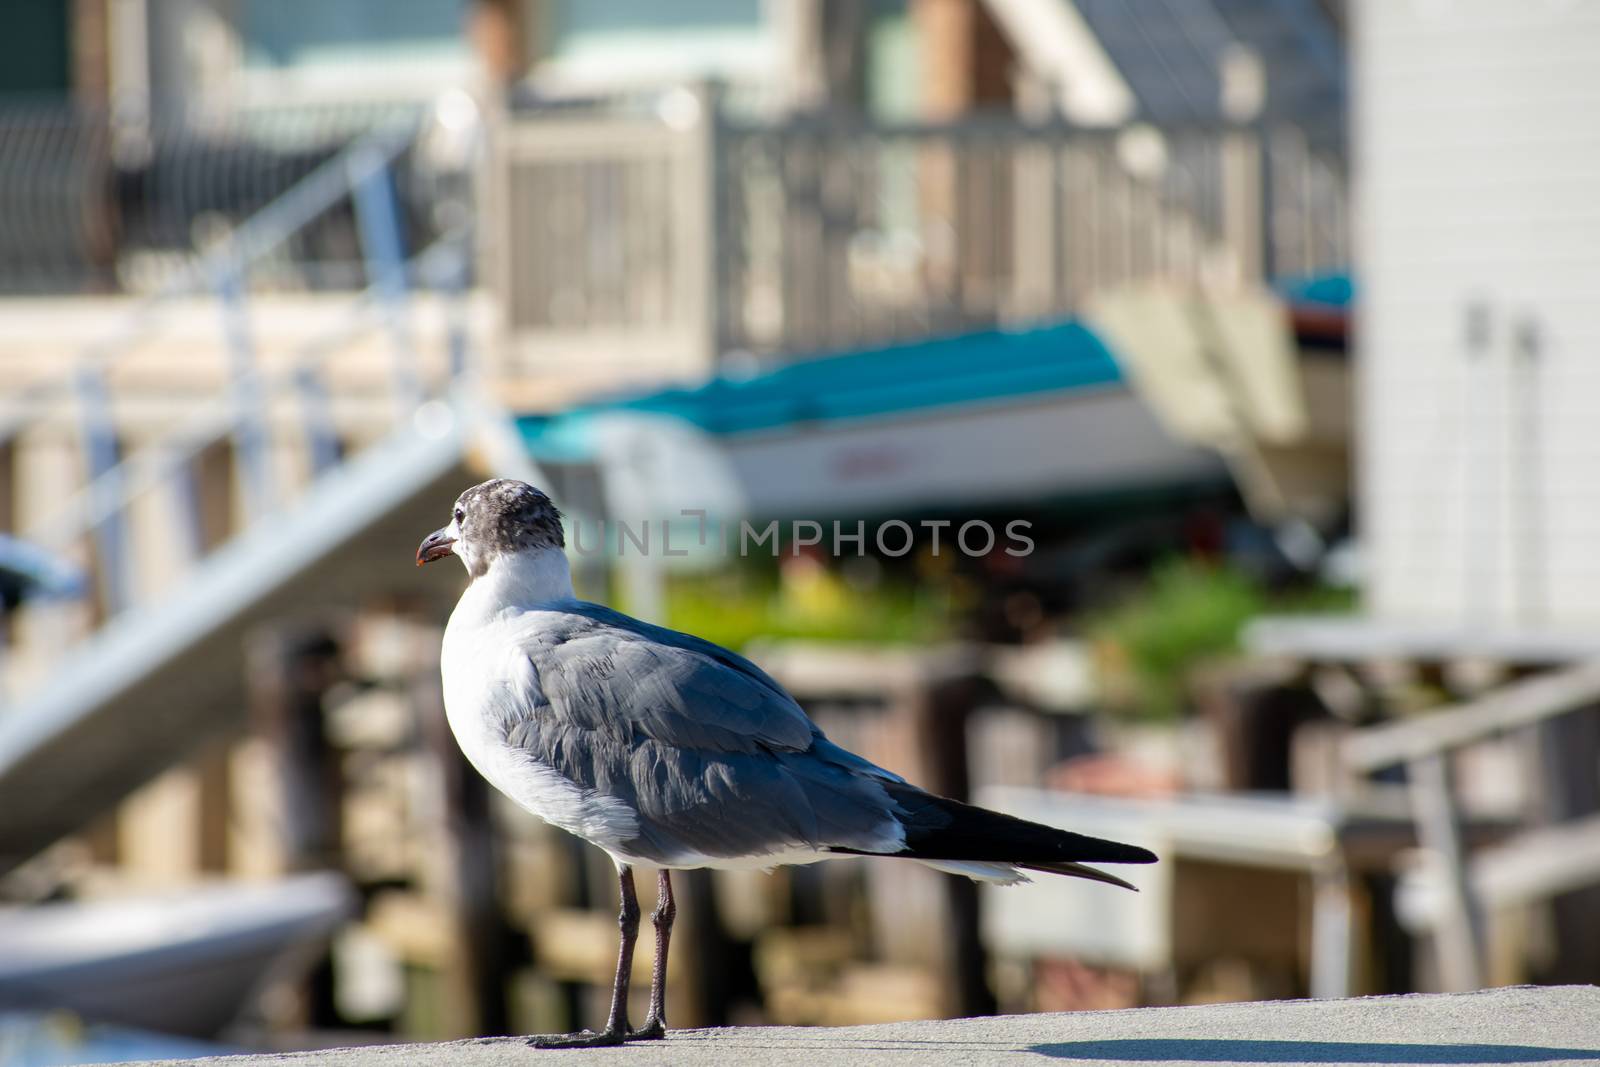 A Seagull Standing On a Concrete Ledge Looking Off in the Distan by bju12290